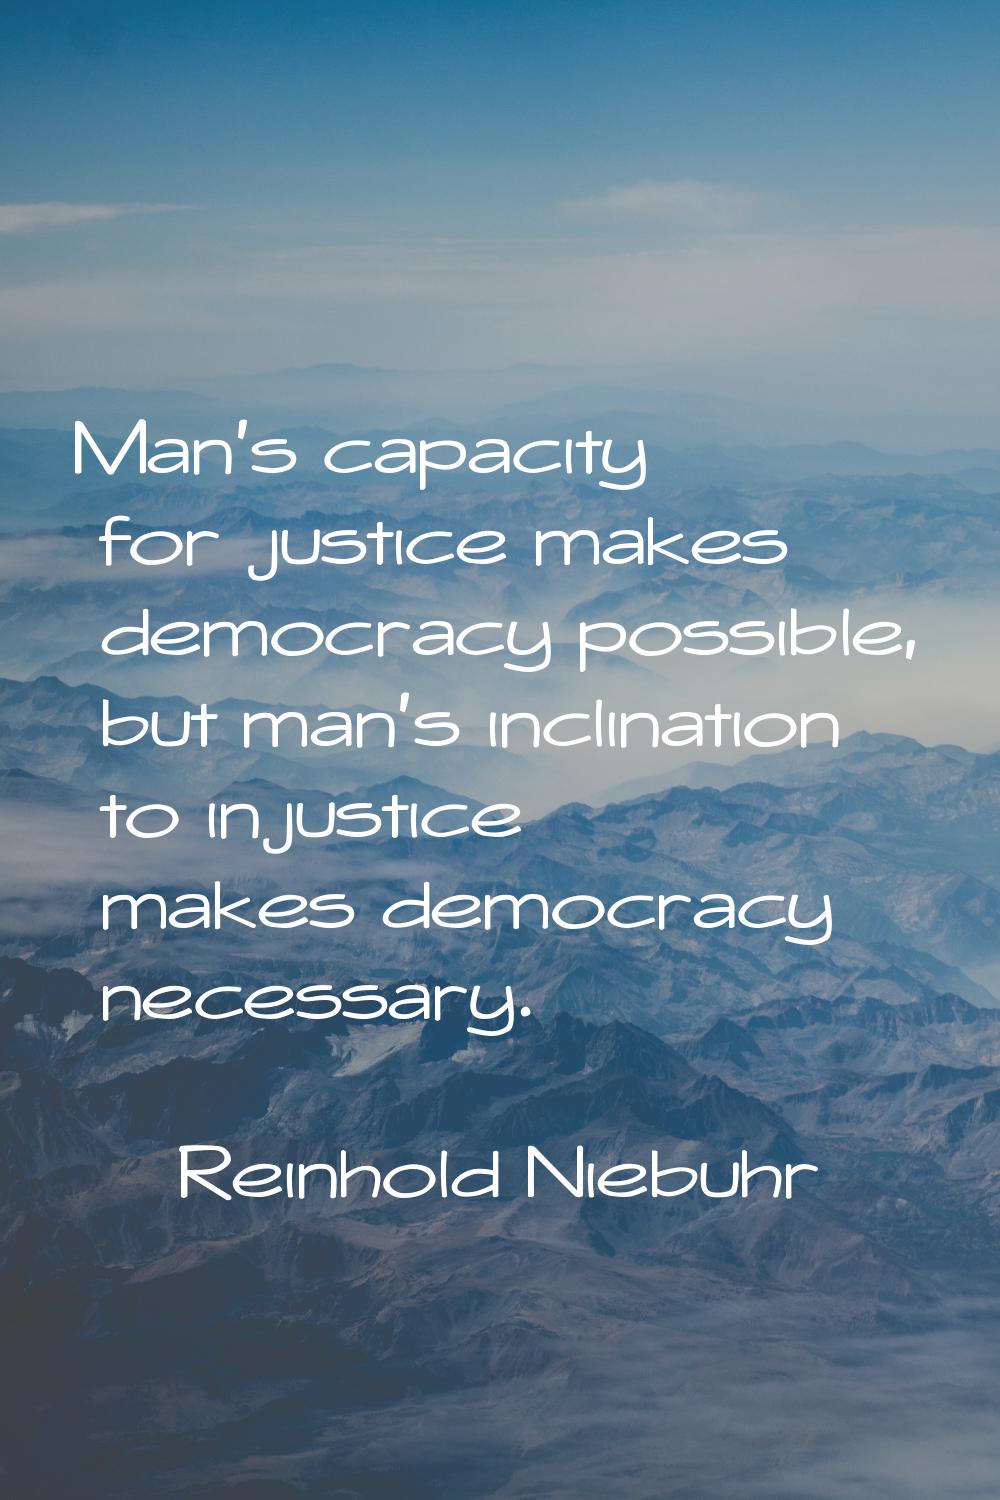 Man's capacity for justice makes democracy possible, but man's inclination to injustice makes democ